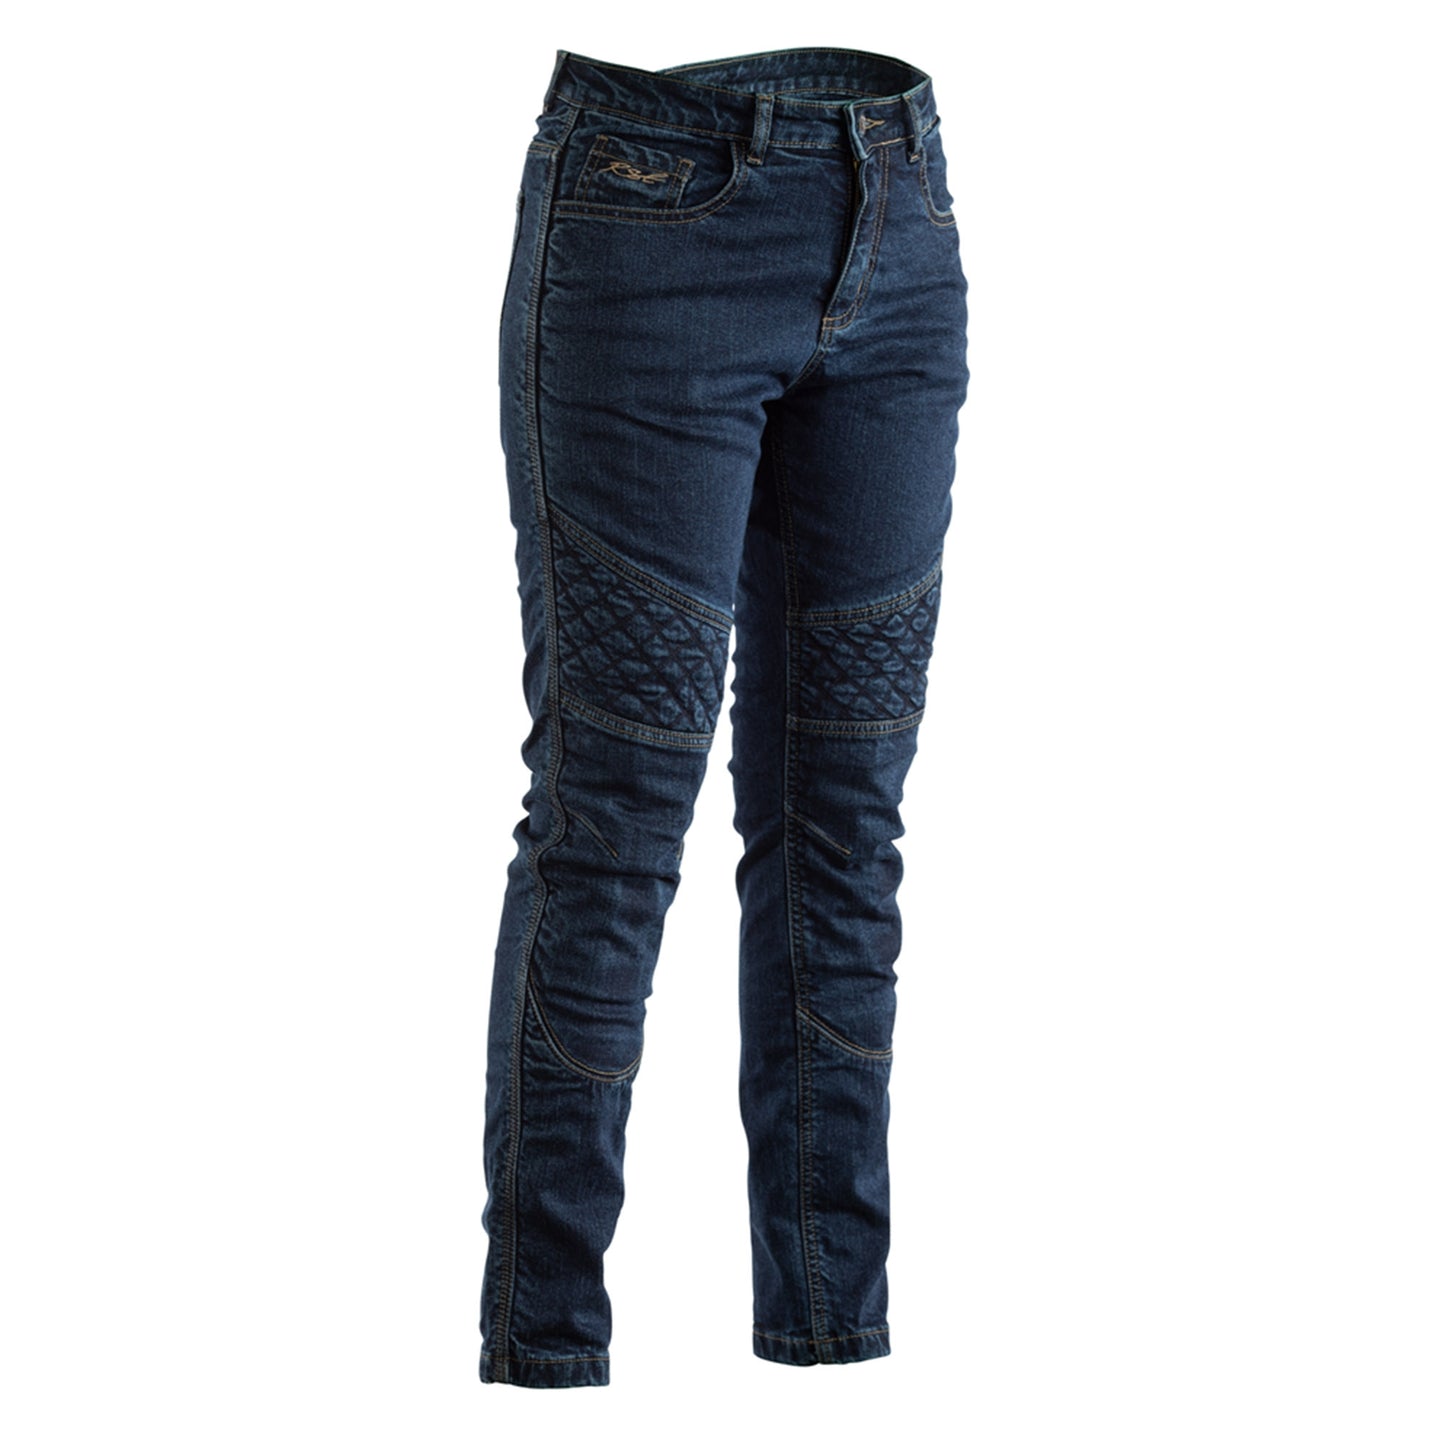 RST Reinforced Straight Leg (CE) Ladies Jeans - Includes Knee Armour - Regular Length - Blue